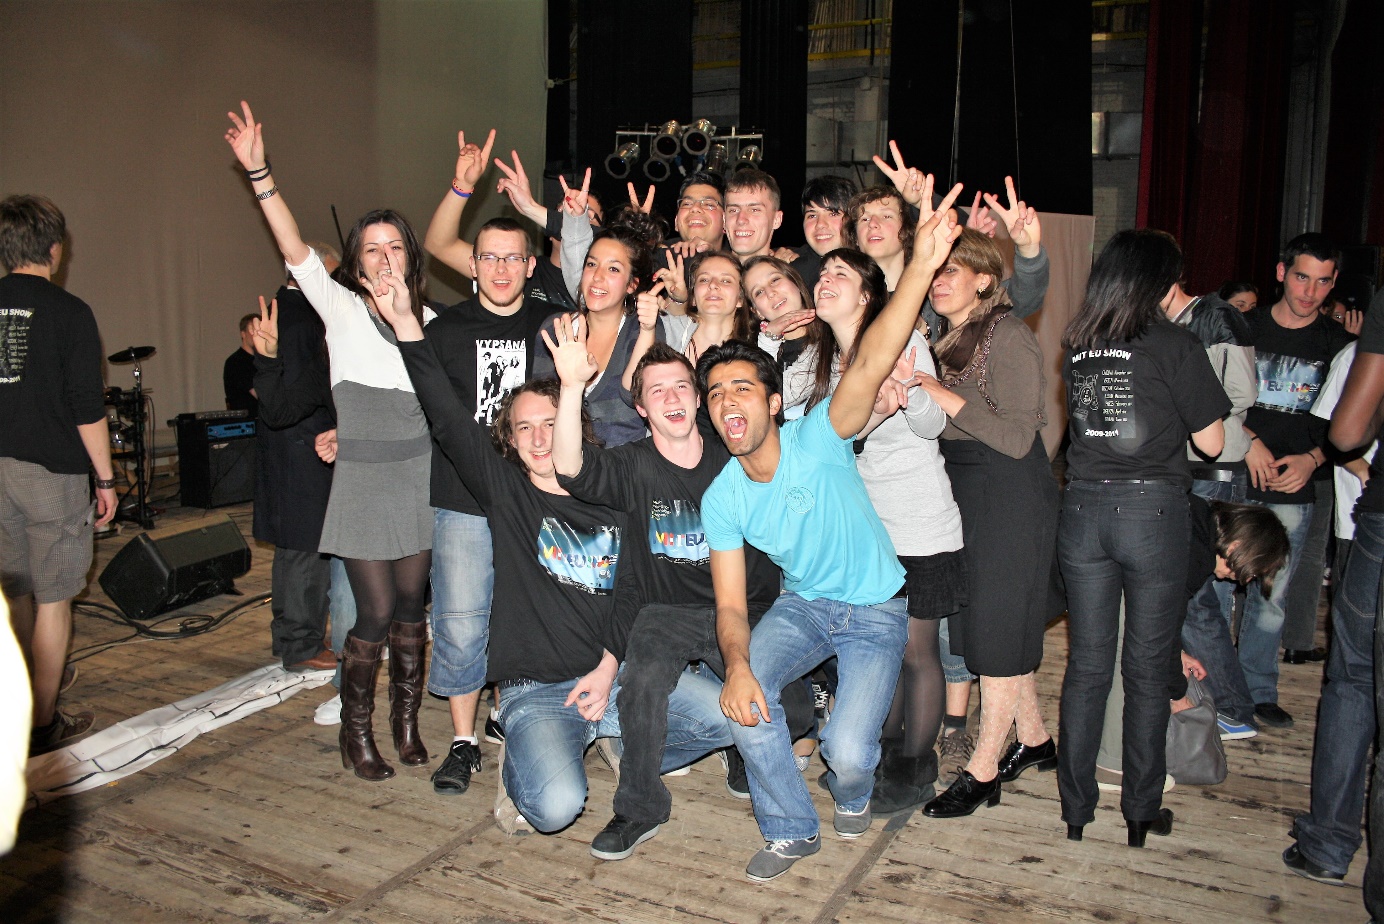 Cheering after the last concert in Cosenza in February 2011